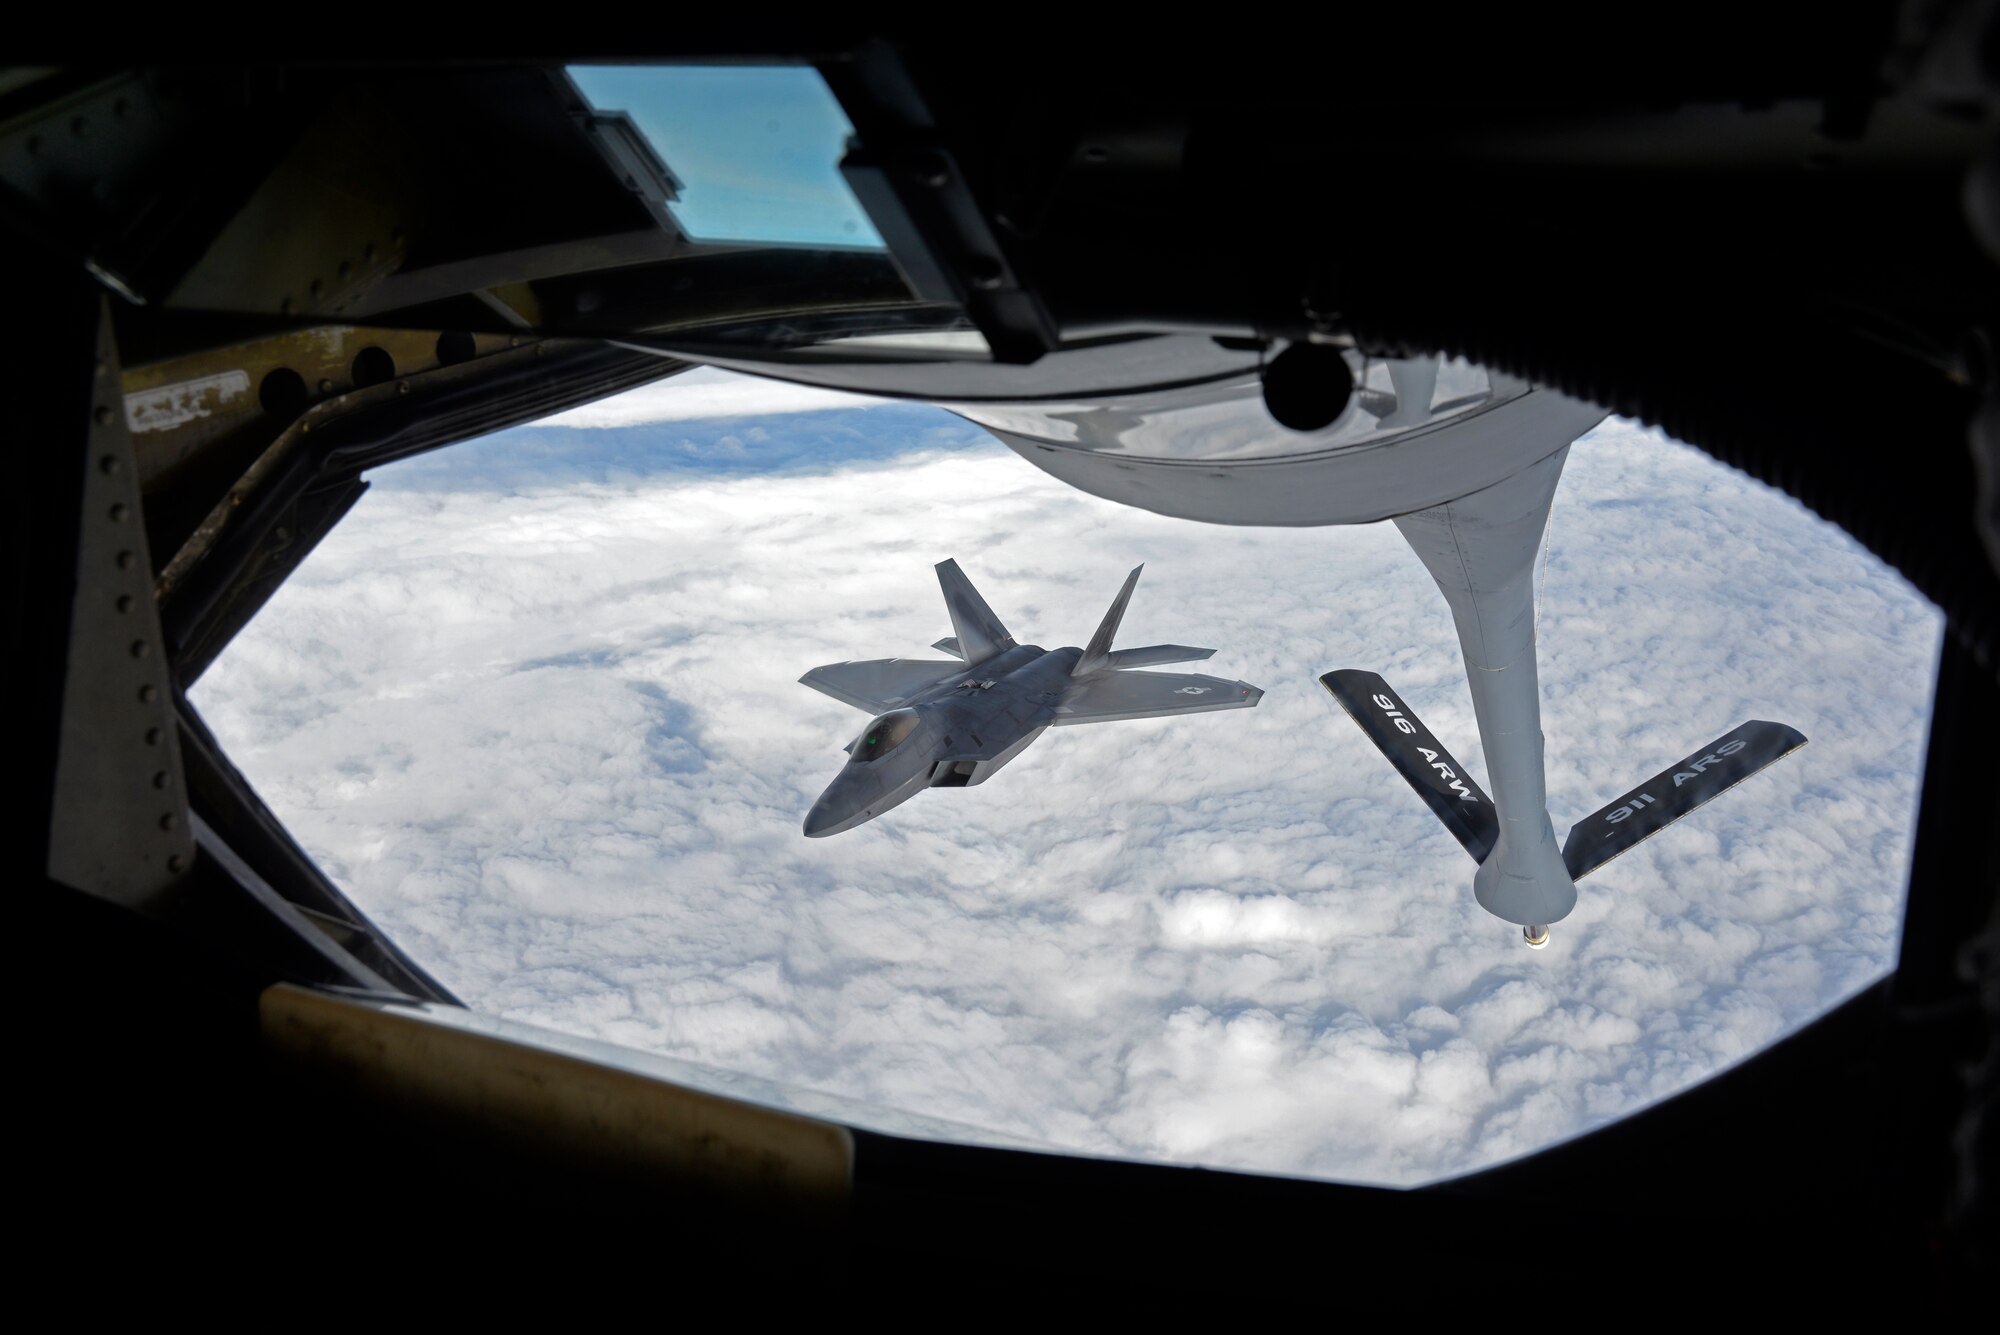 A KC-135 Stratotanker from Seymour Johnson Air Force Base, N.C. refuels an F-22A Raptor from the 95th Fighter Squadron, Tyndall Air Force Base, Florida, over European skies before landing at Mihail Kogalniceanu Air Base, Romania, April 25, 2016. The aircraft will conduct air training with other Europe-based aircraft to maximize training opportunities while demonstrating the U.S. commitment to NATO allies and the security of Europe. (U.S. Air Force photo by Capt. Leah Davis/Released)